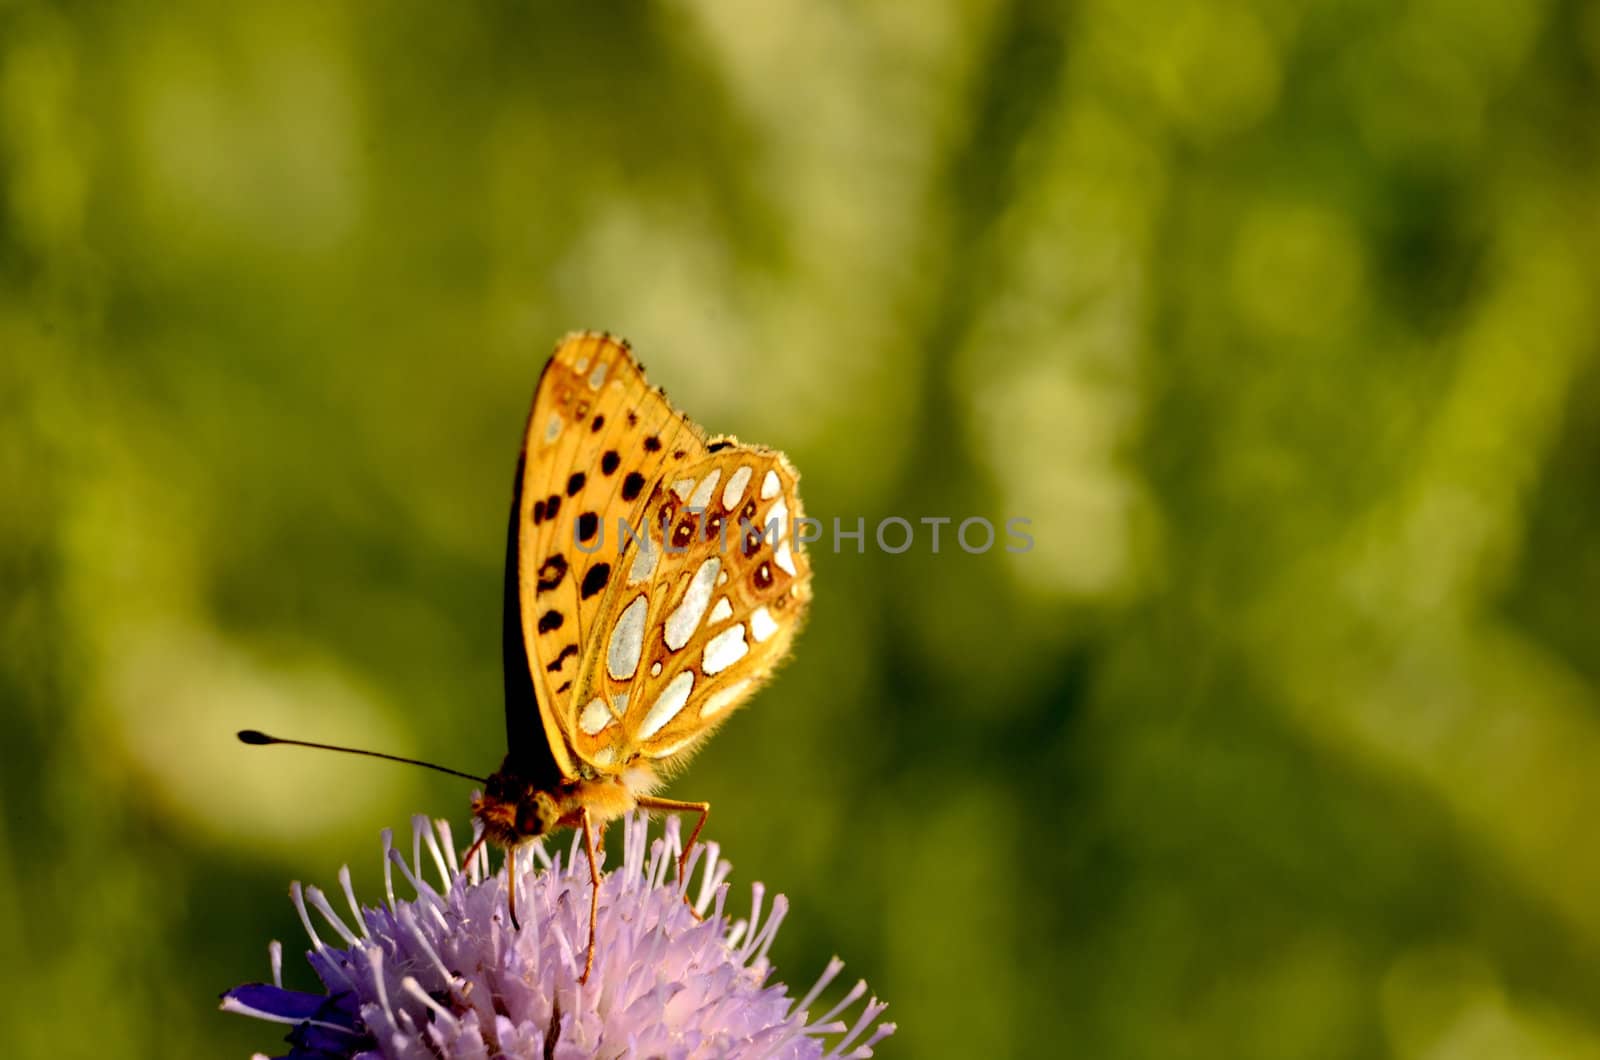 This photo present butterfly of the family Boloria on clover flower